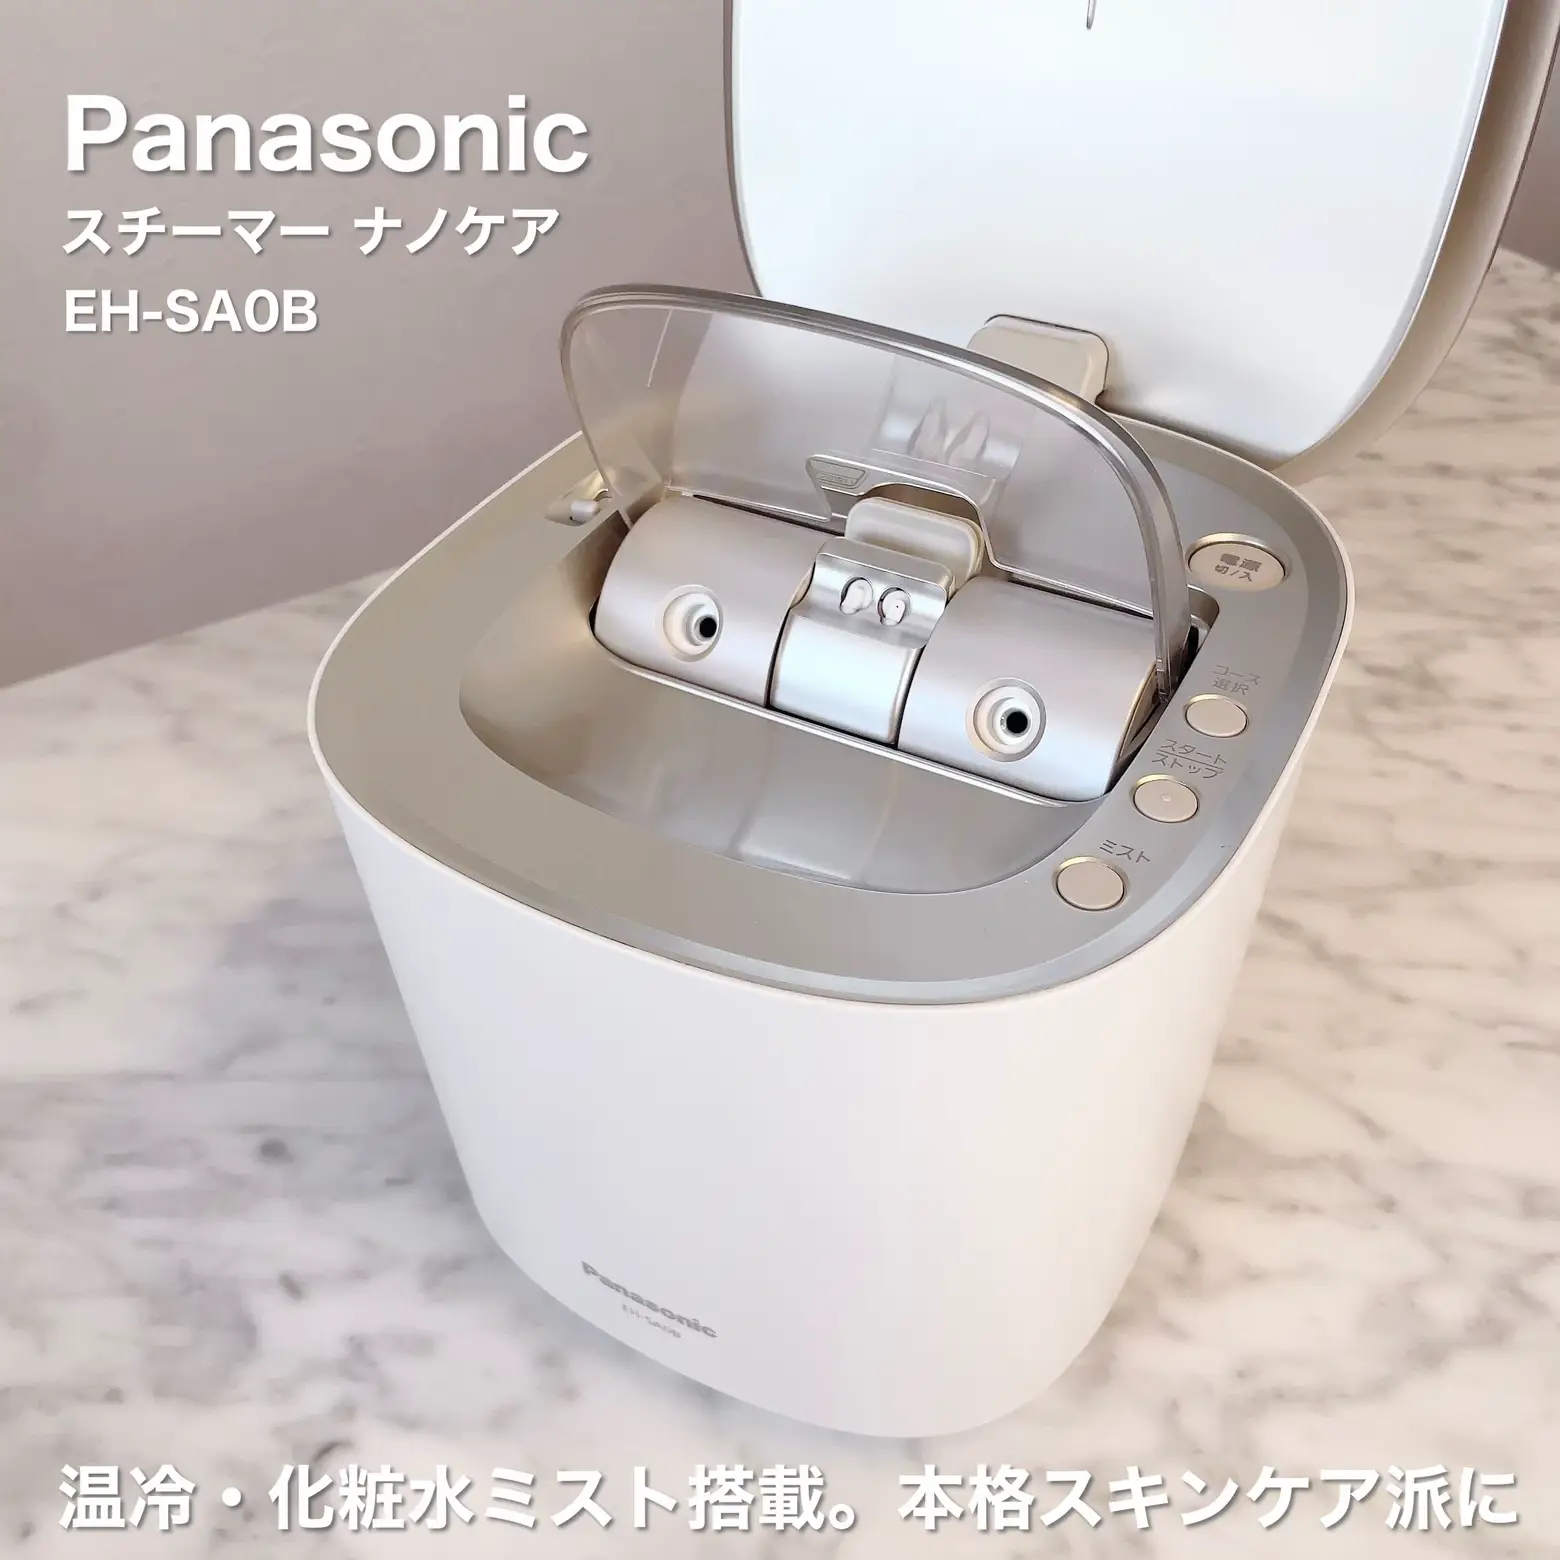 How about a healing home beauty time with Panasonic's steamer